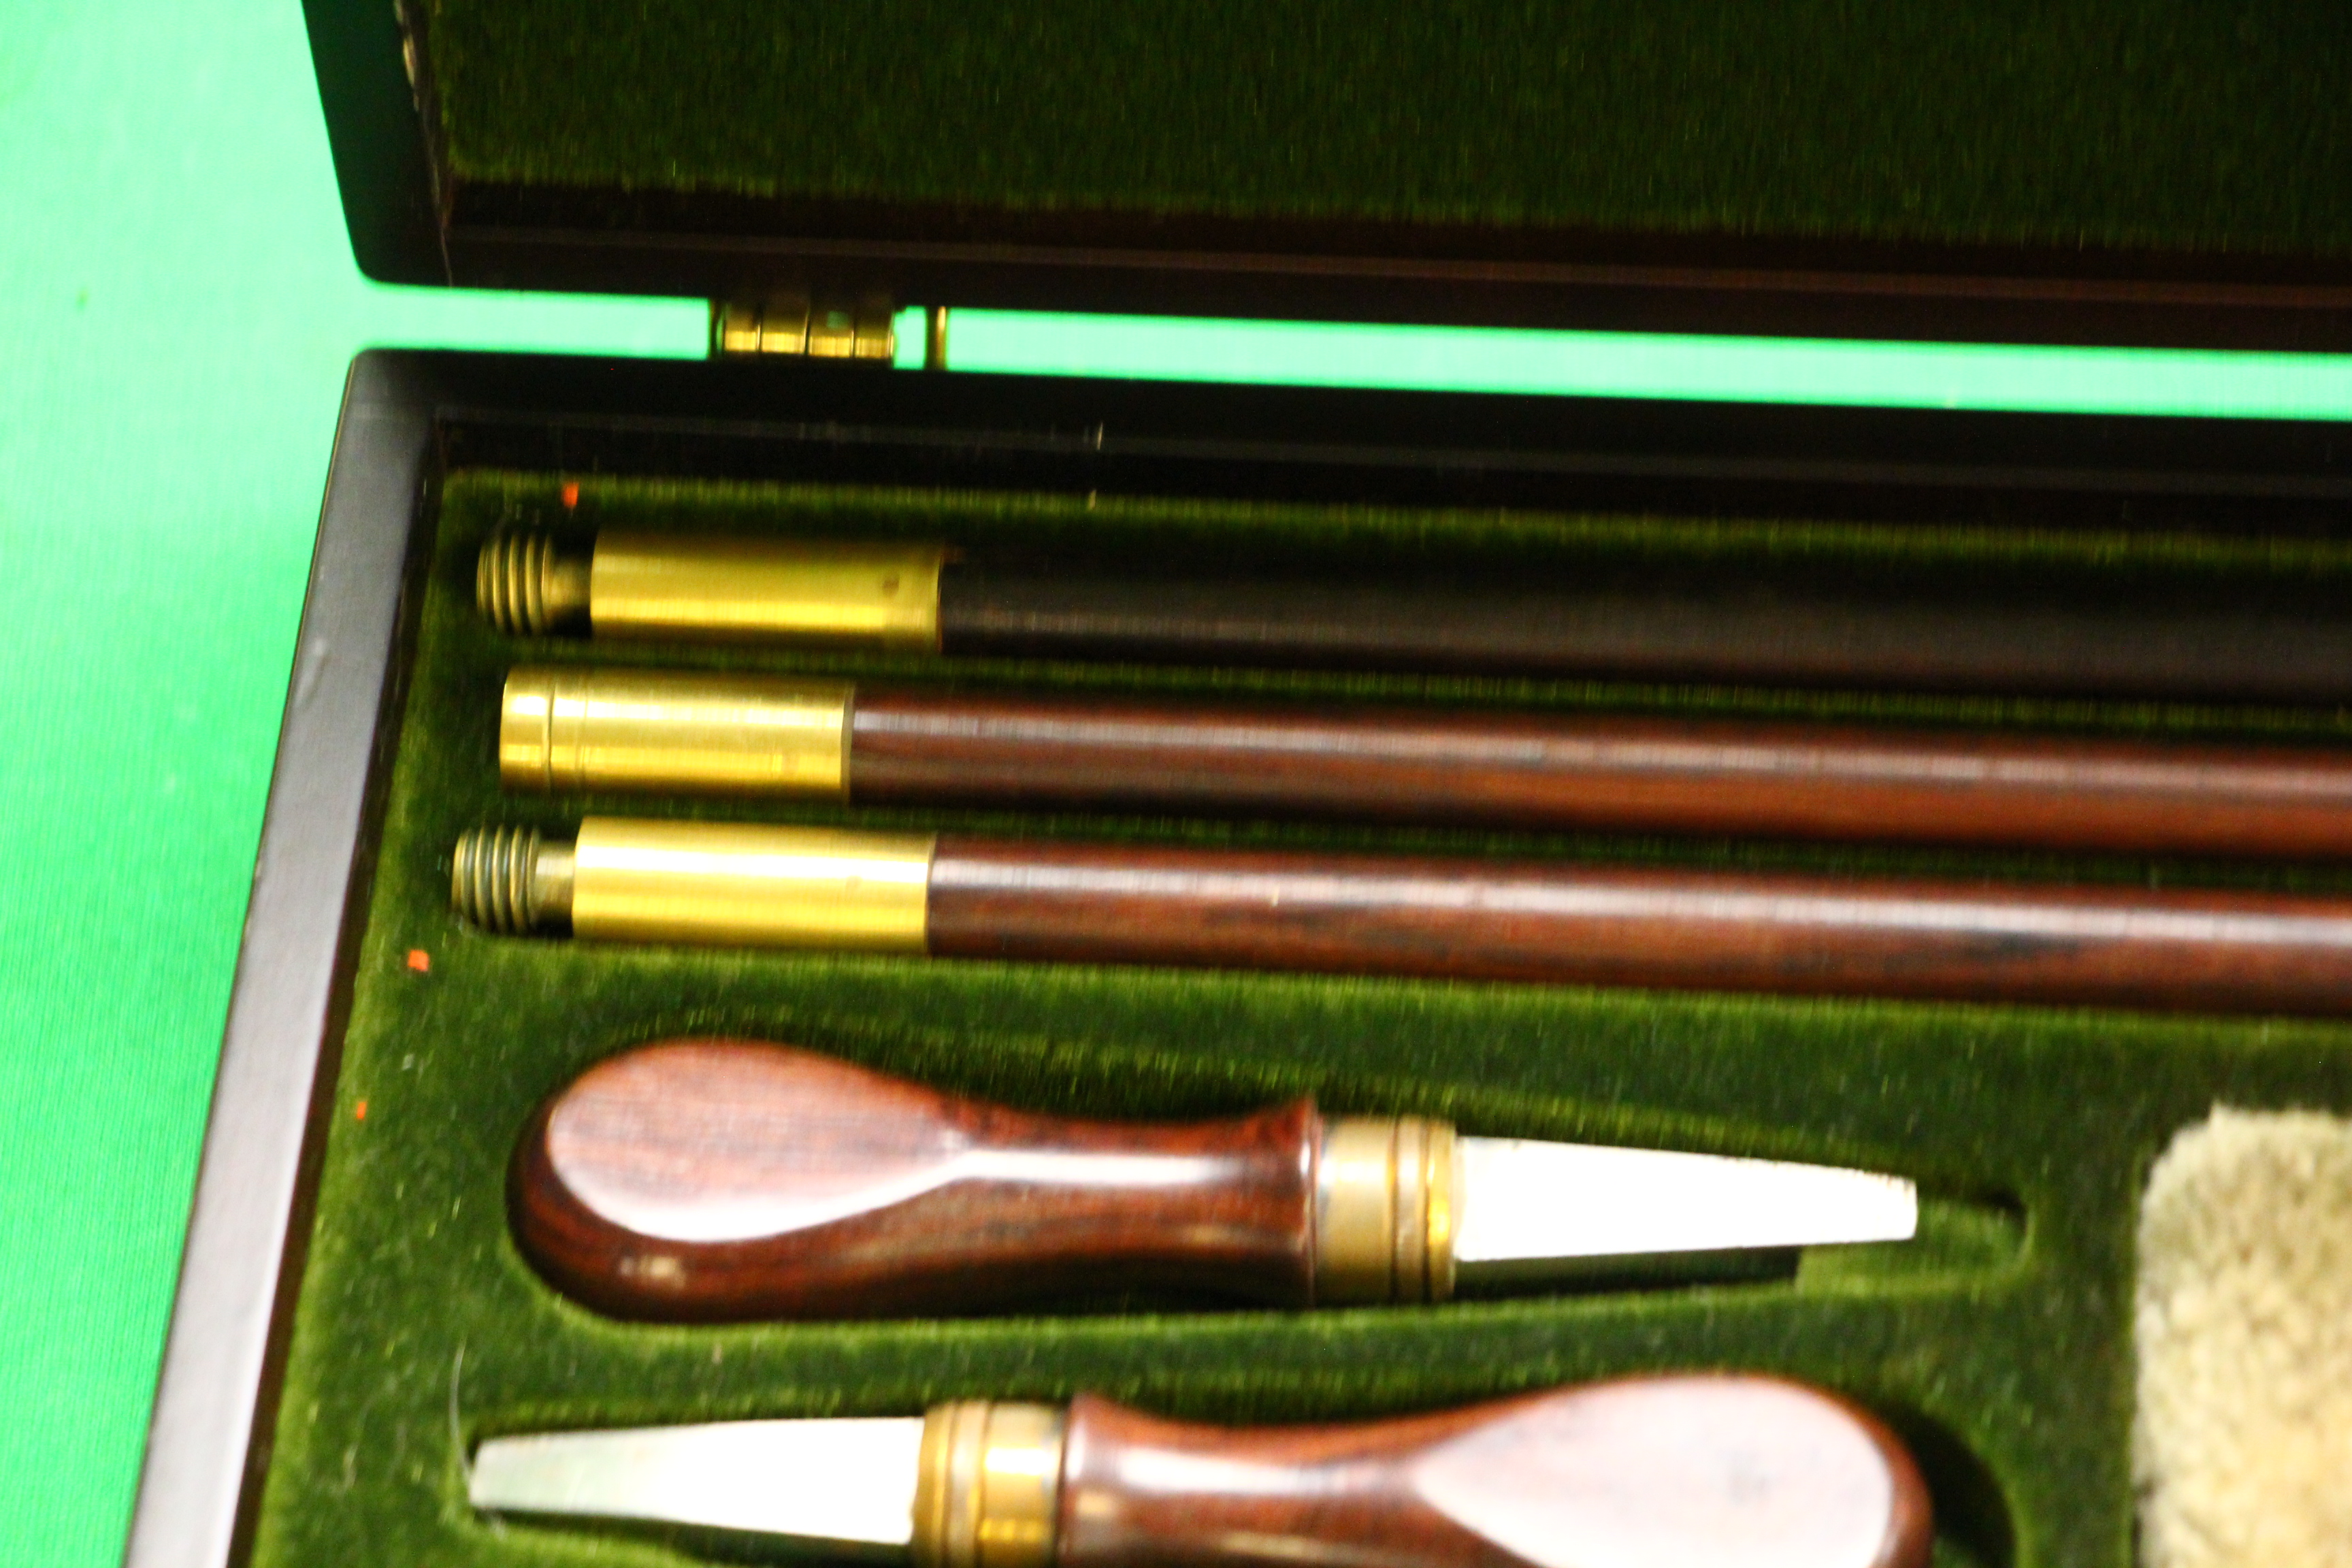 A WILLIAM POWELL CASED 12 GAUGE GUN CLEANING KIT AND ACCESSORIES - Image 3 of 9